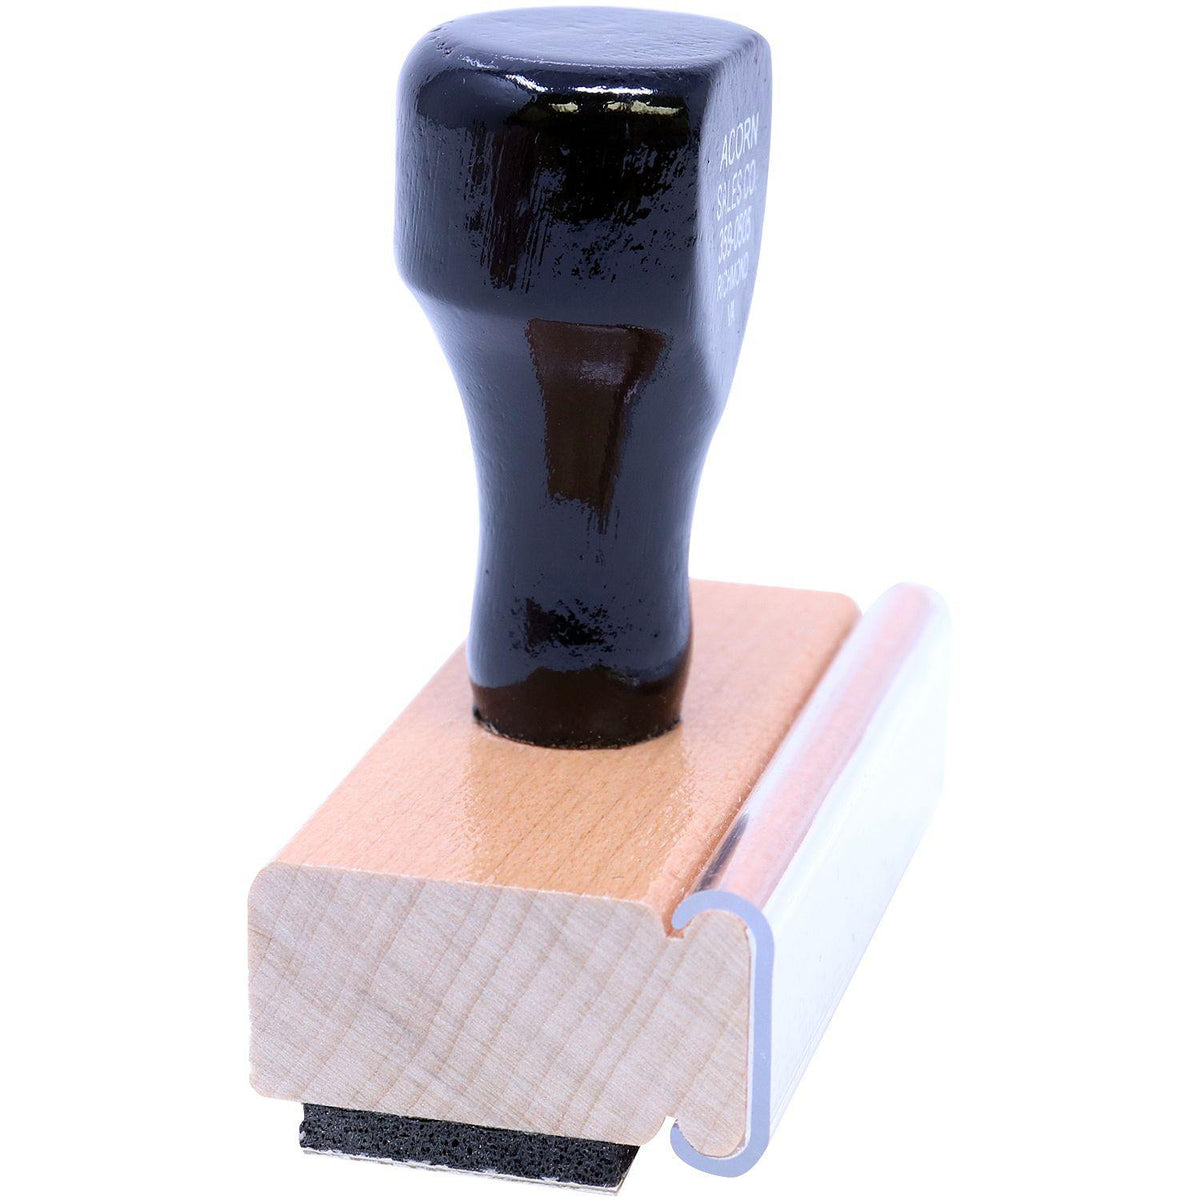 Side View of Large Parcel Post Air Rubber Stamp at an Angle